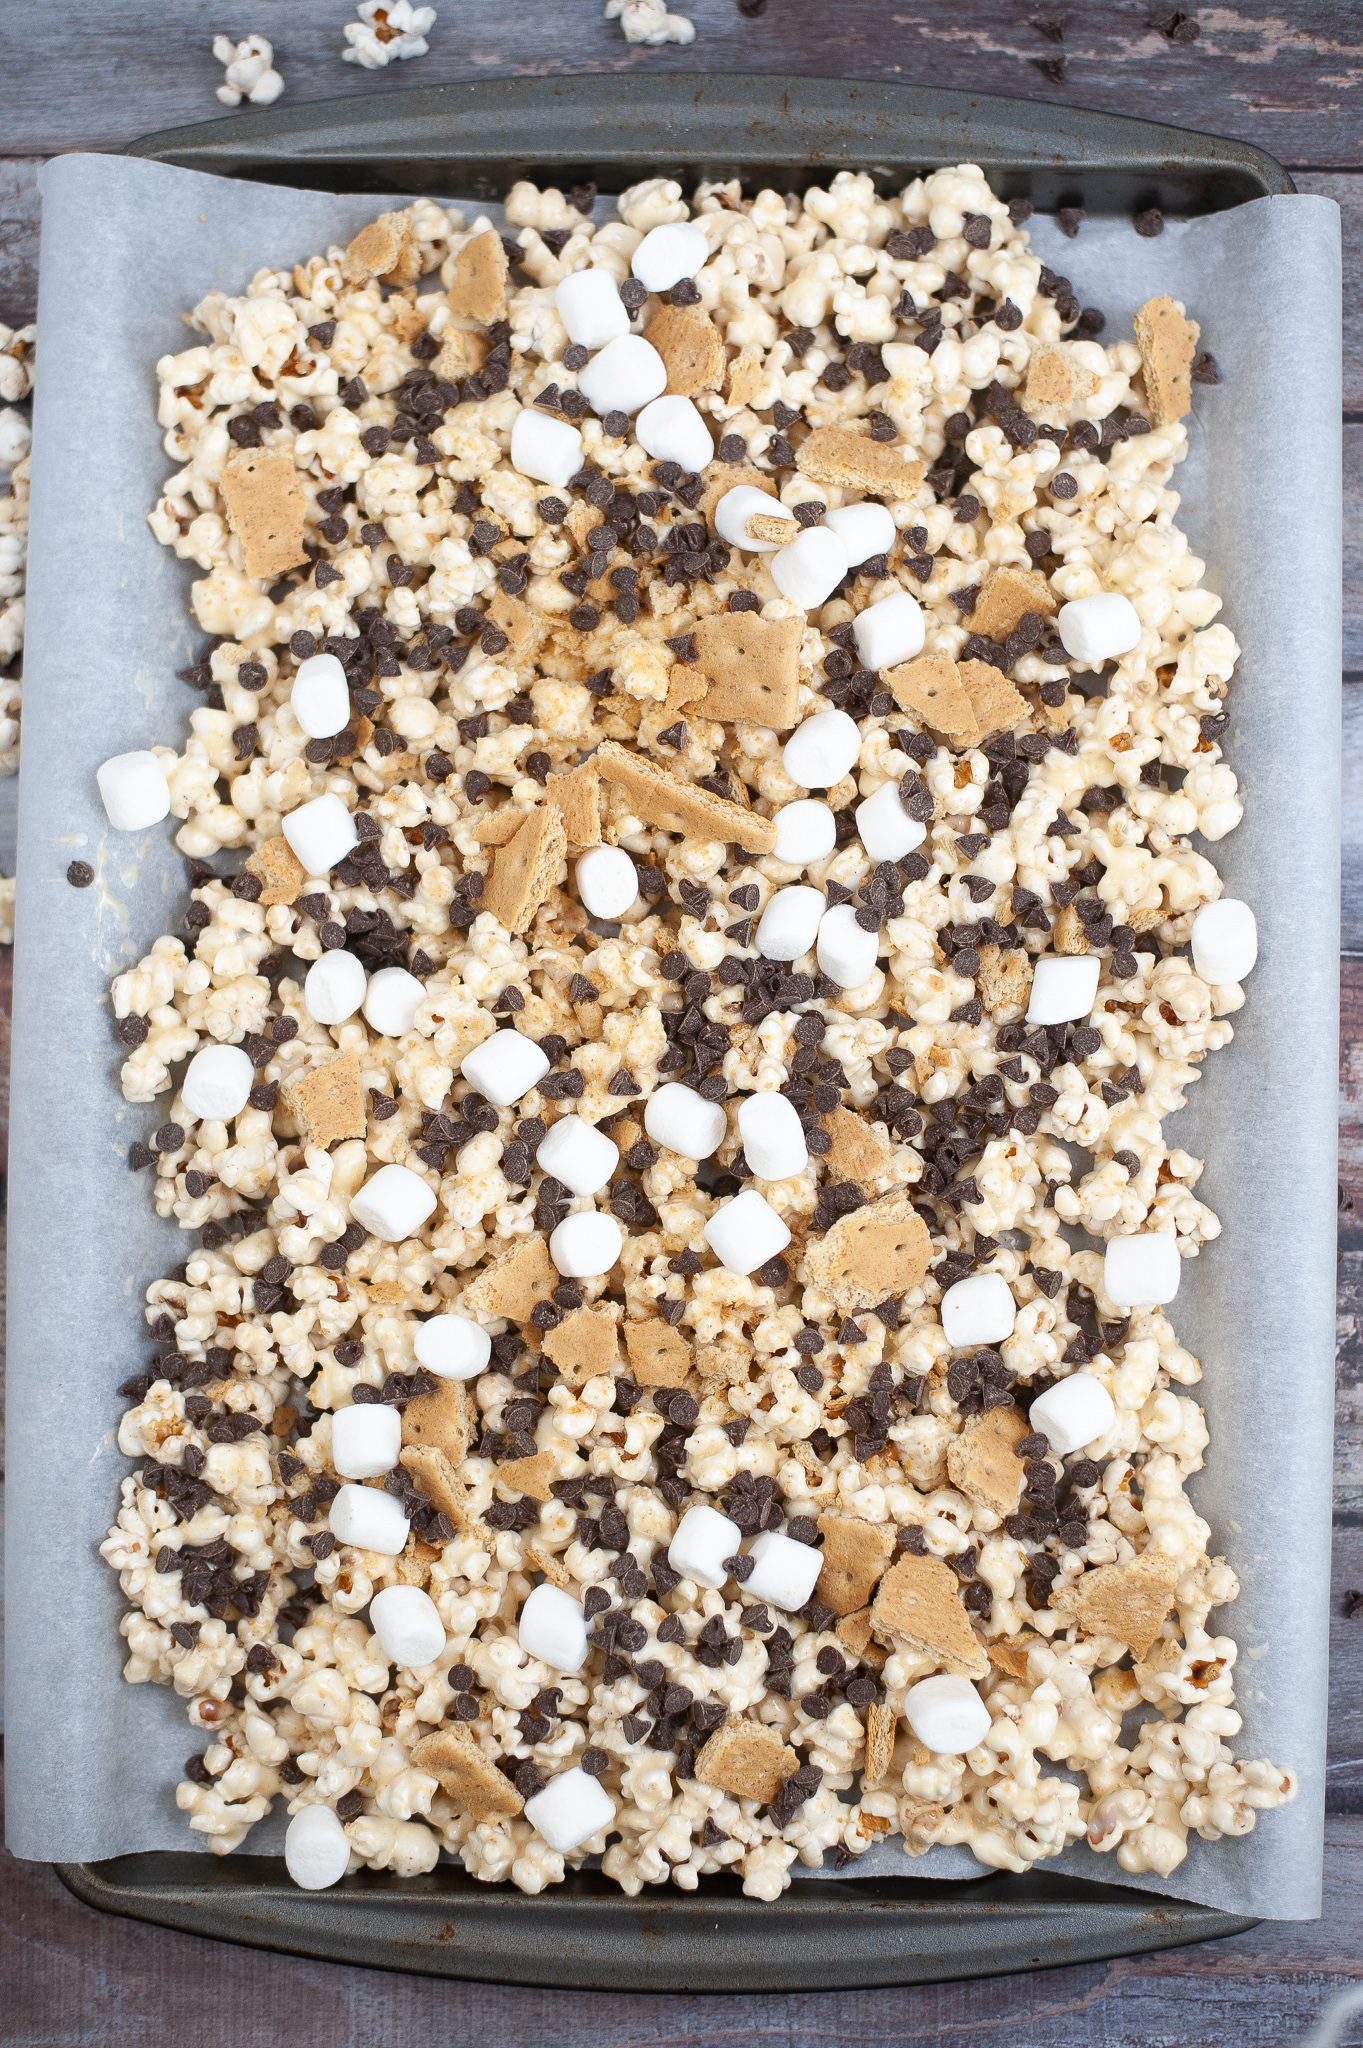 Popcorn on a tray with marshmallows, crushed graham crackers, and chocolate chips on top on a baking tray with parchment paper.